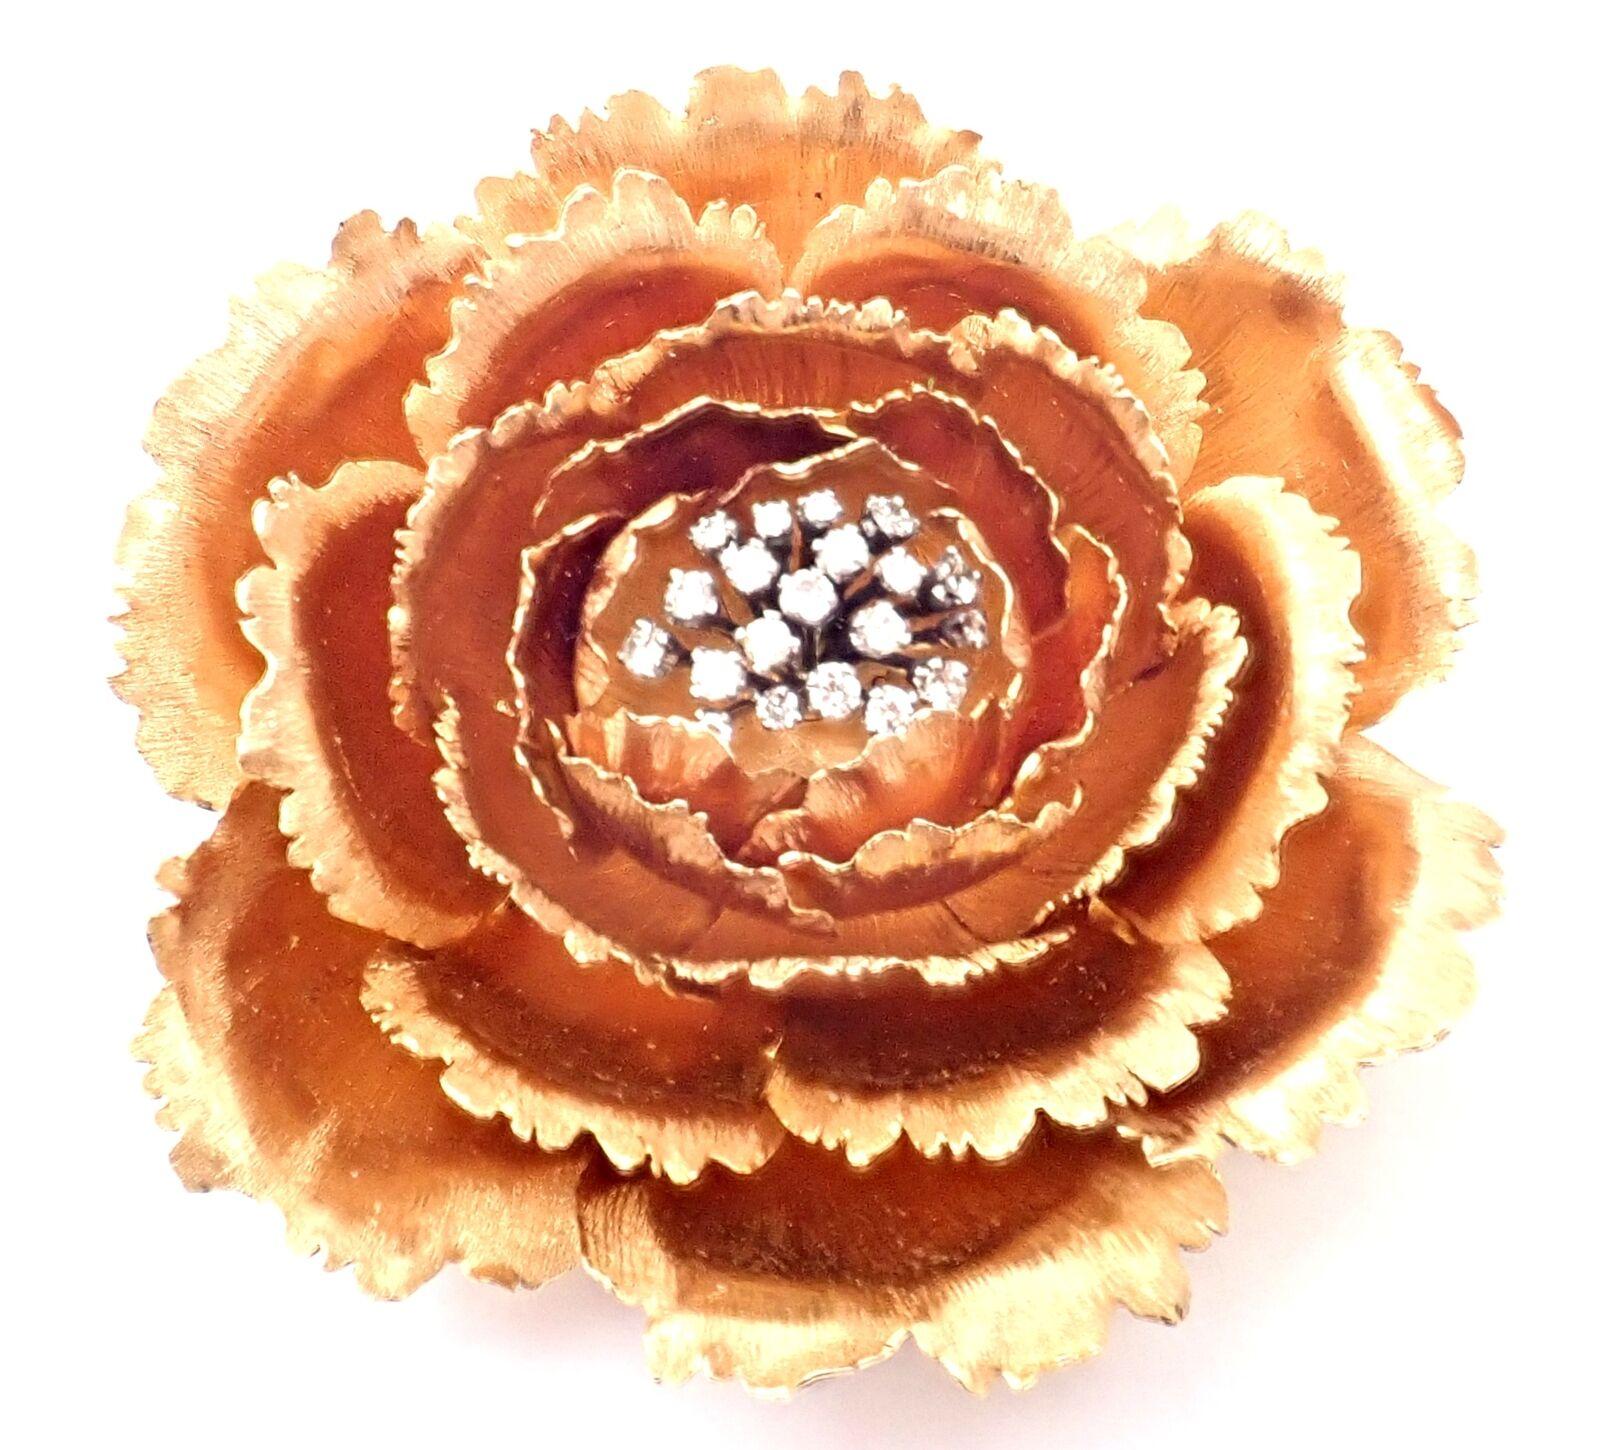 18k Rose Gold Diamond Extra Large Rose Brooch Pin by Buccellati. 
With 20 brilliant cut VS1 clarity, G color diamonds total weight approximately .80ct
Details: 
Weight: 61.9 grams
Measurements: 2 3/4